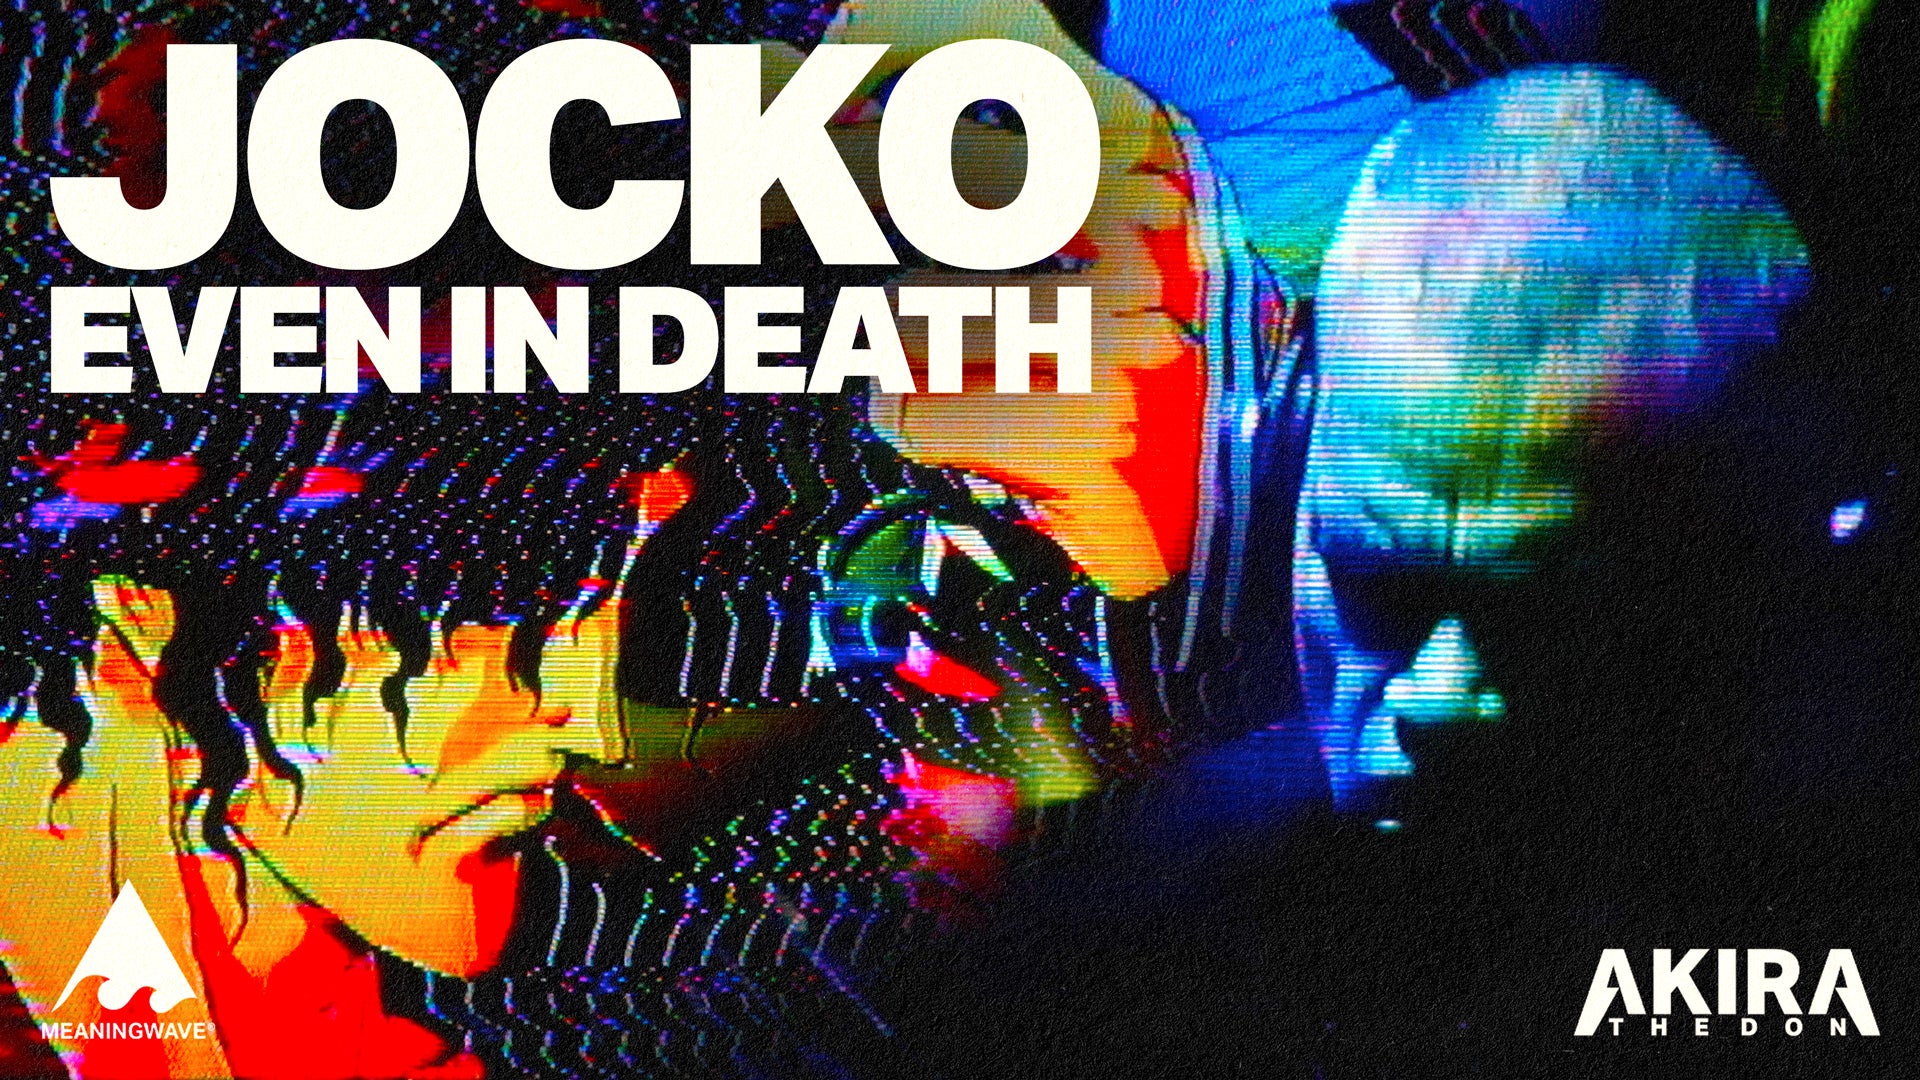 Jocko Willink & Akira The Don - EVEN IN DEATH | Music Video